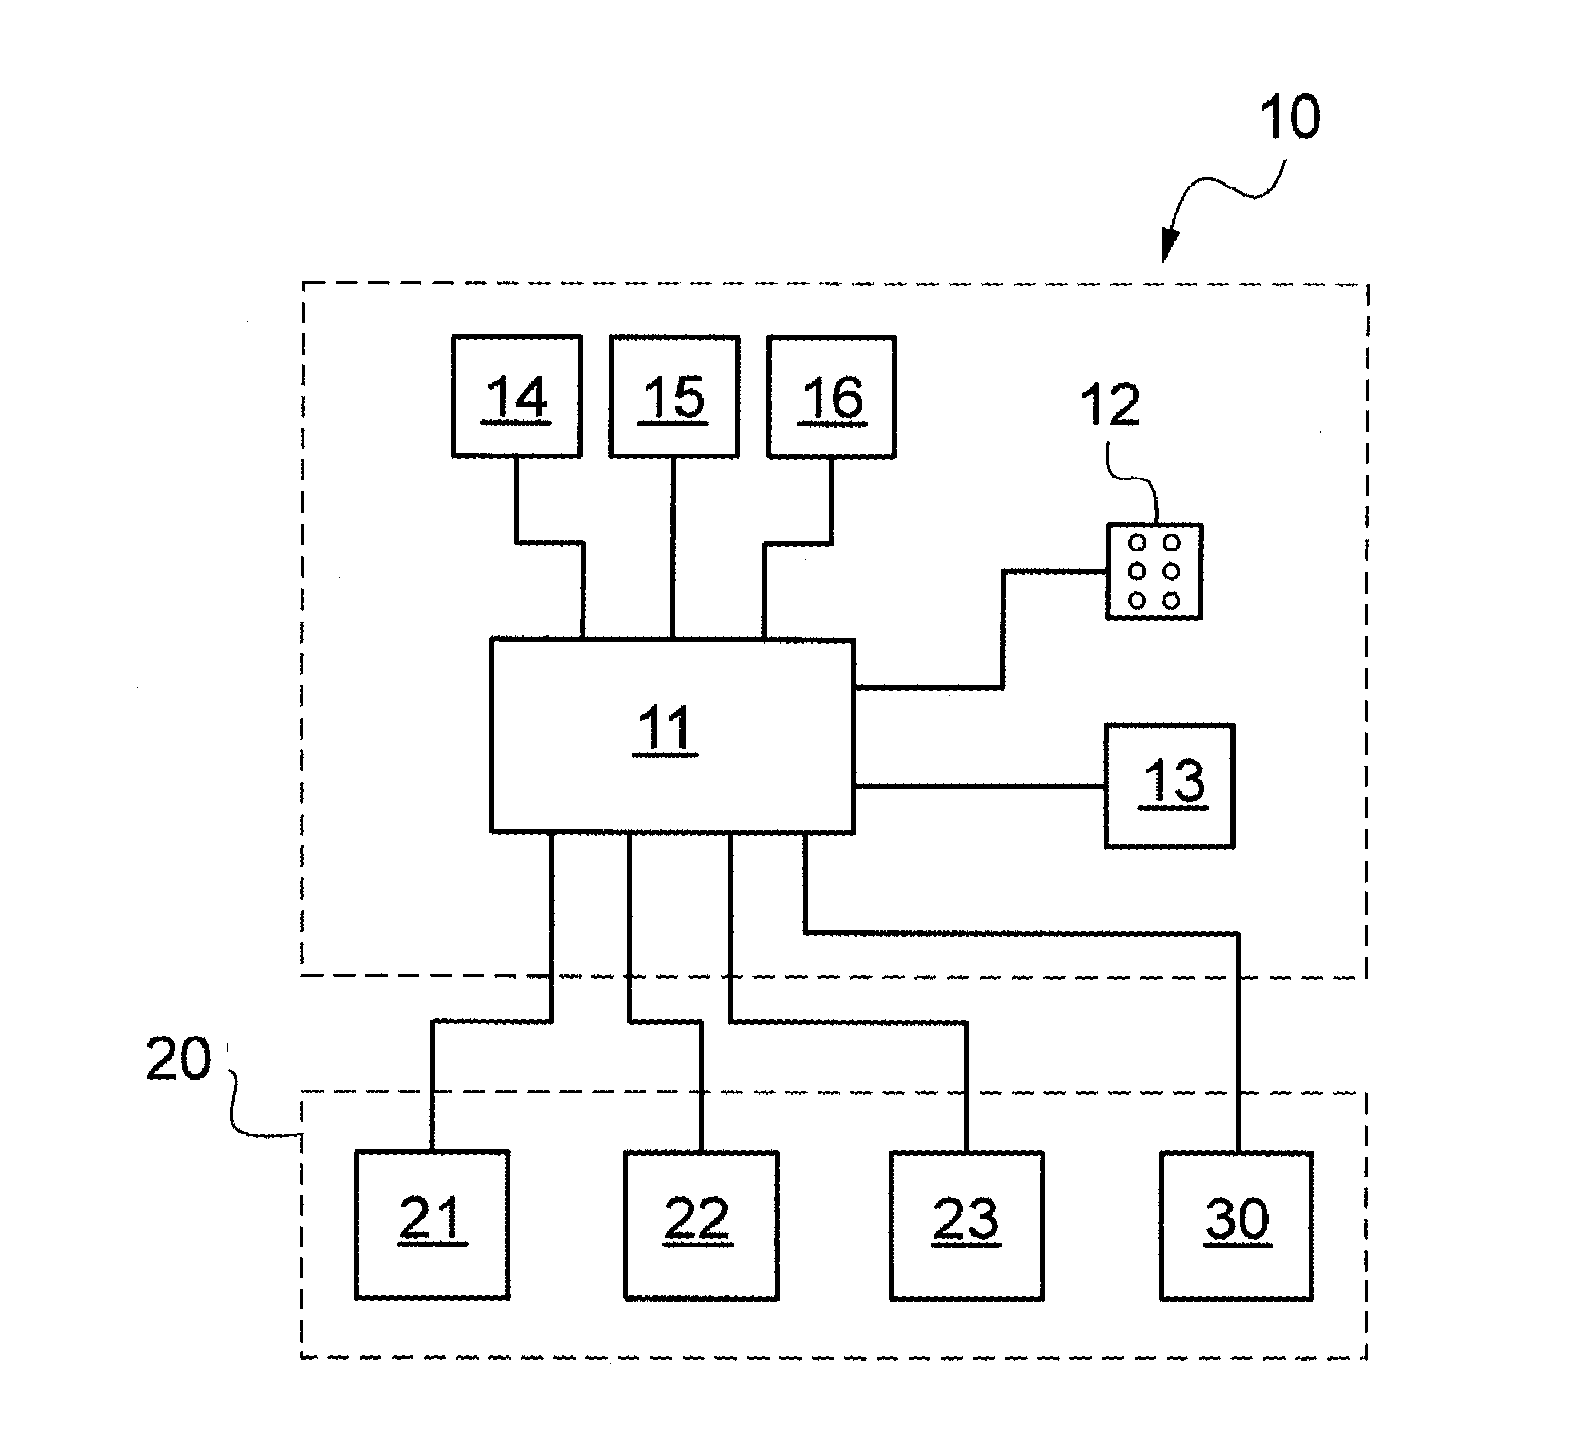 Method and a device for adapting the man-machine interface of an aircraft depending on the level of the pilot's functional state